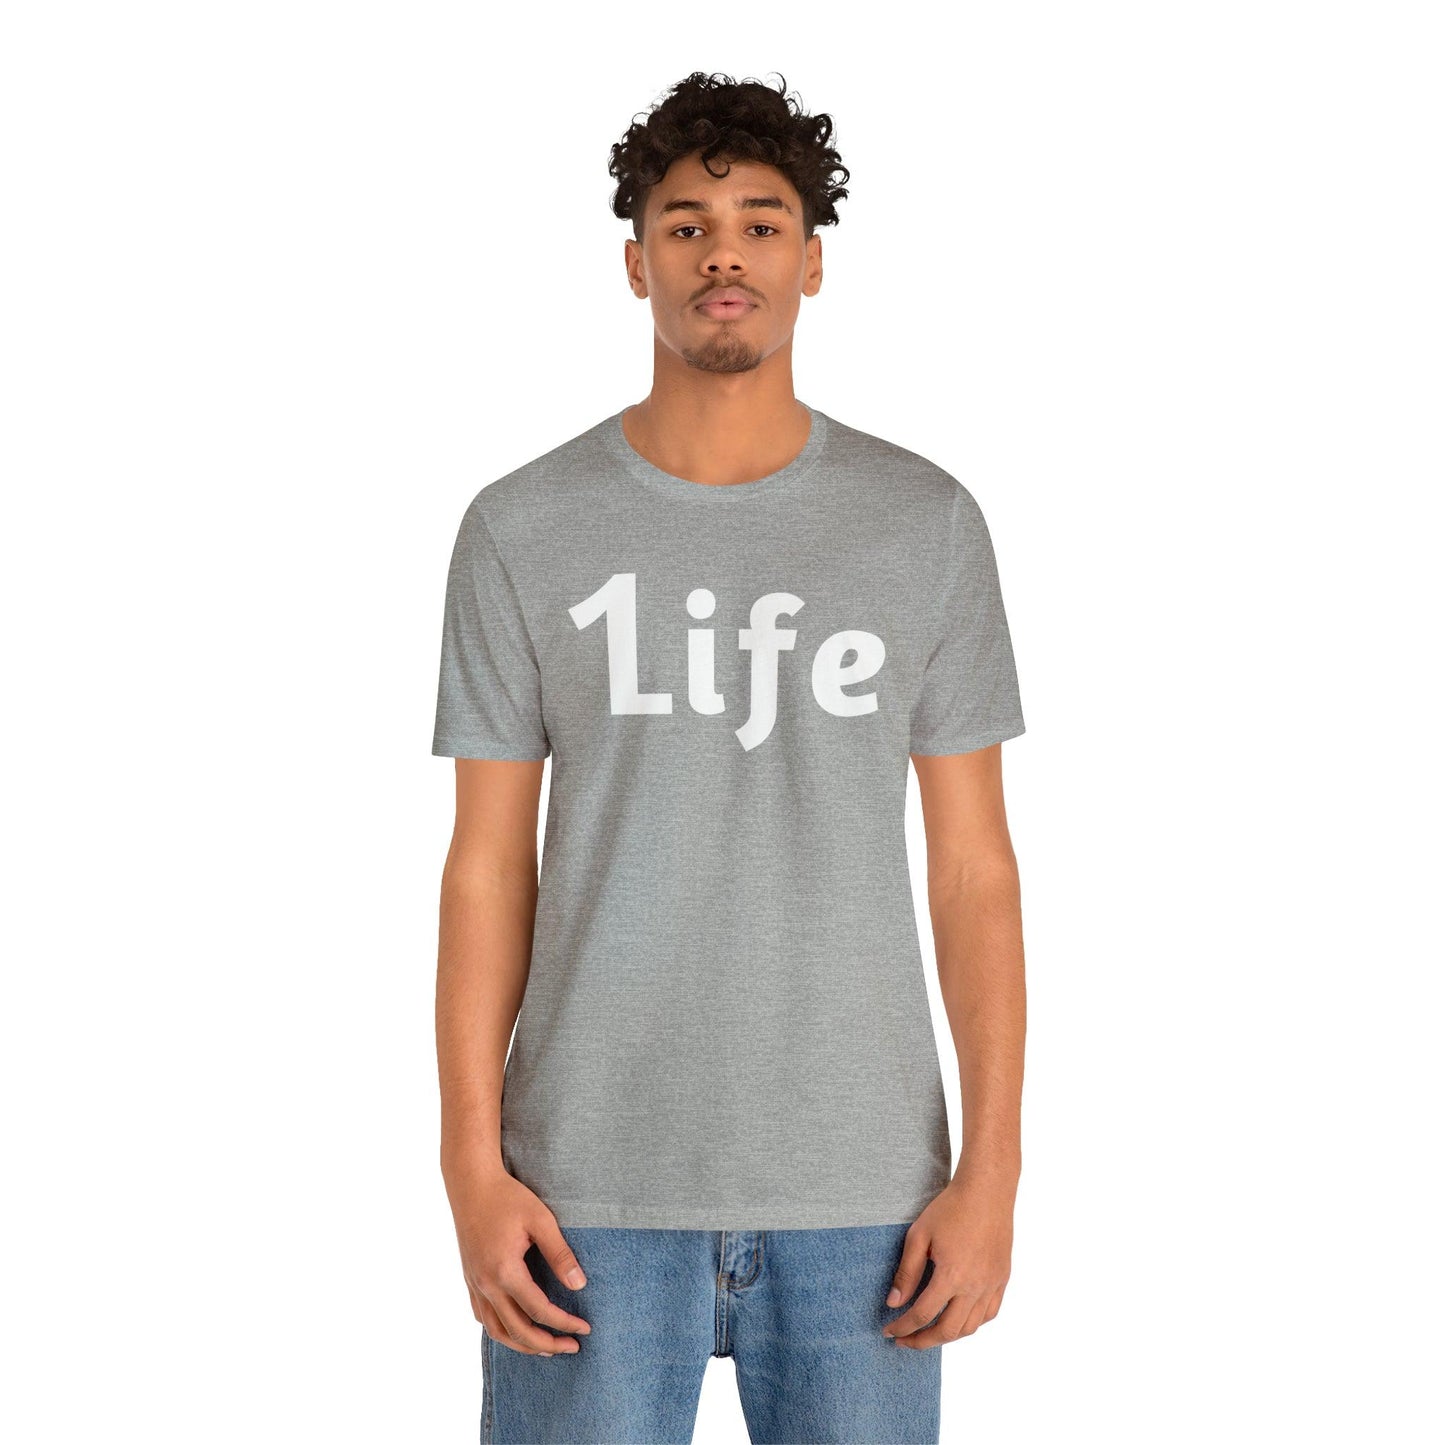 One life Shirt 1life shirt Live Your Life You Only Have One Life To Live - Giftsmojo